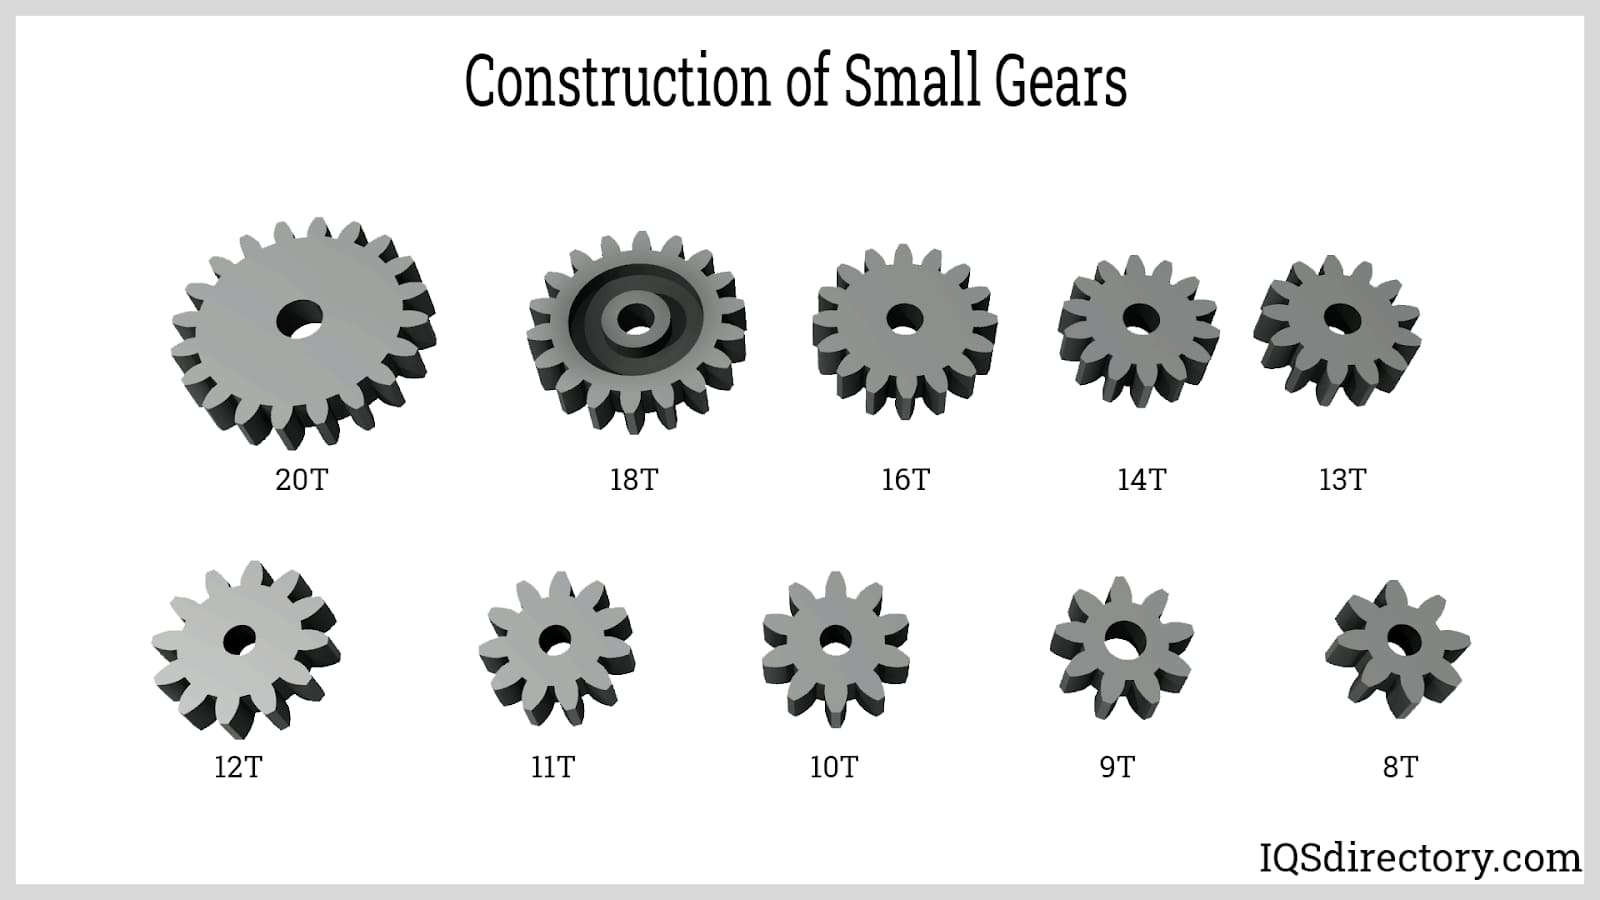 Construction of Small Gears